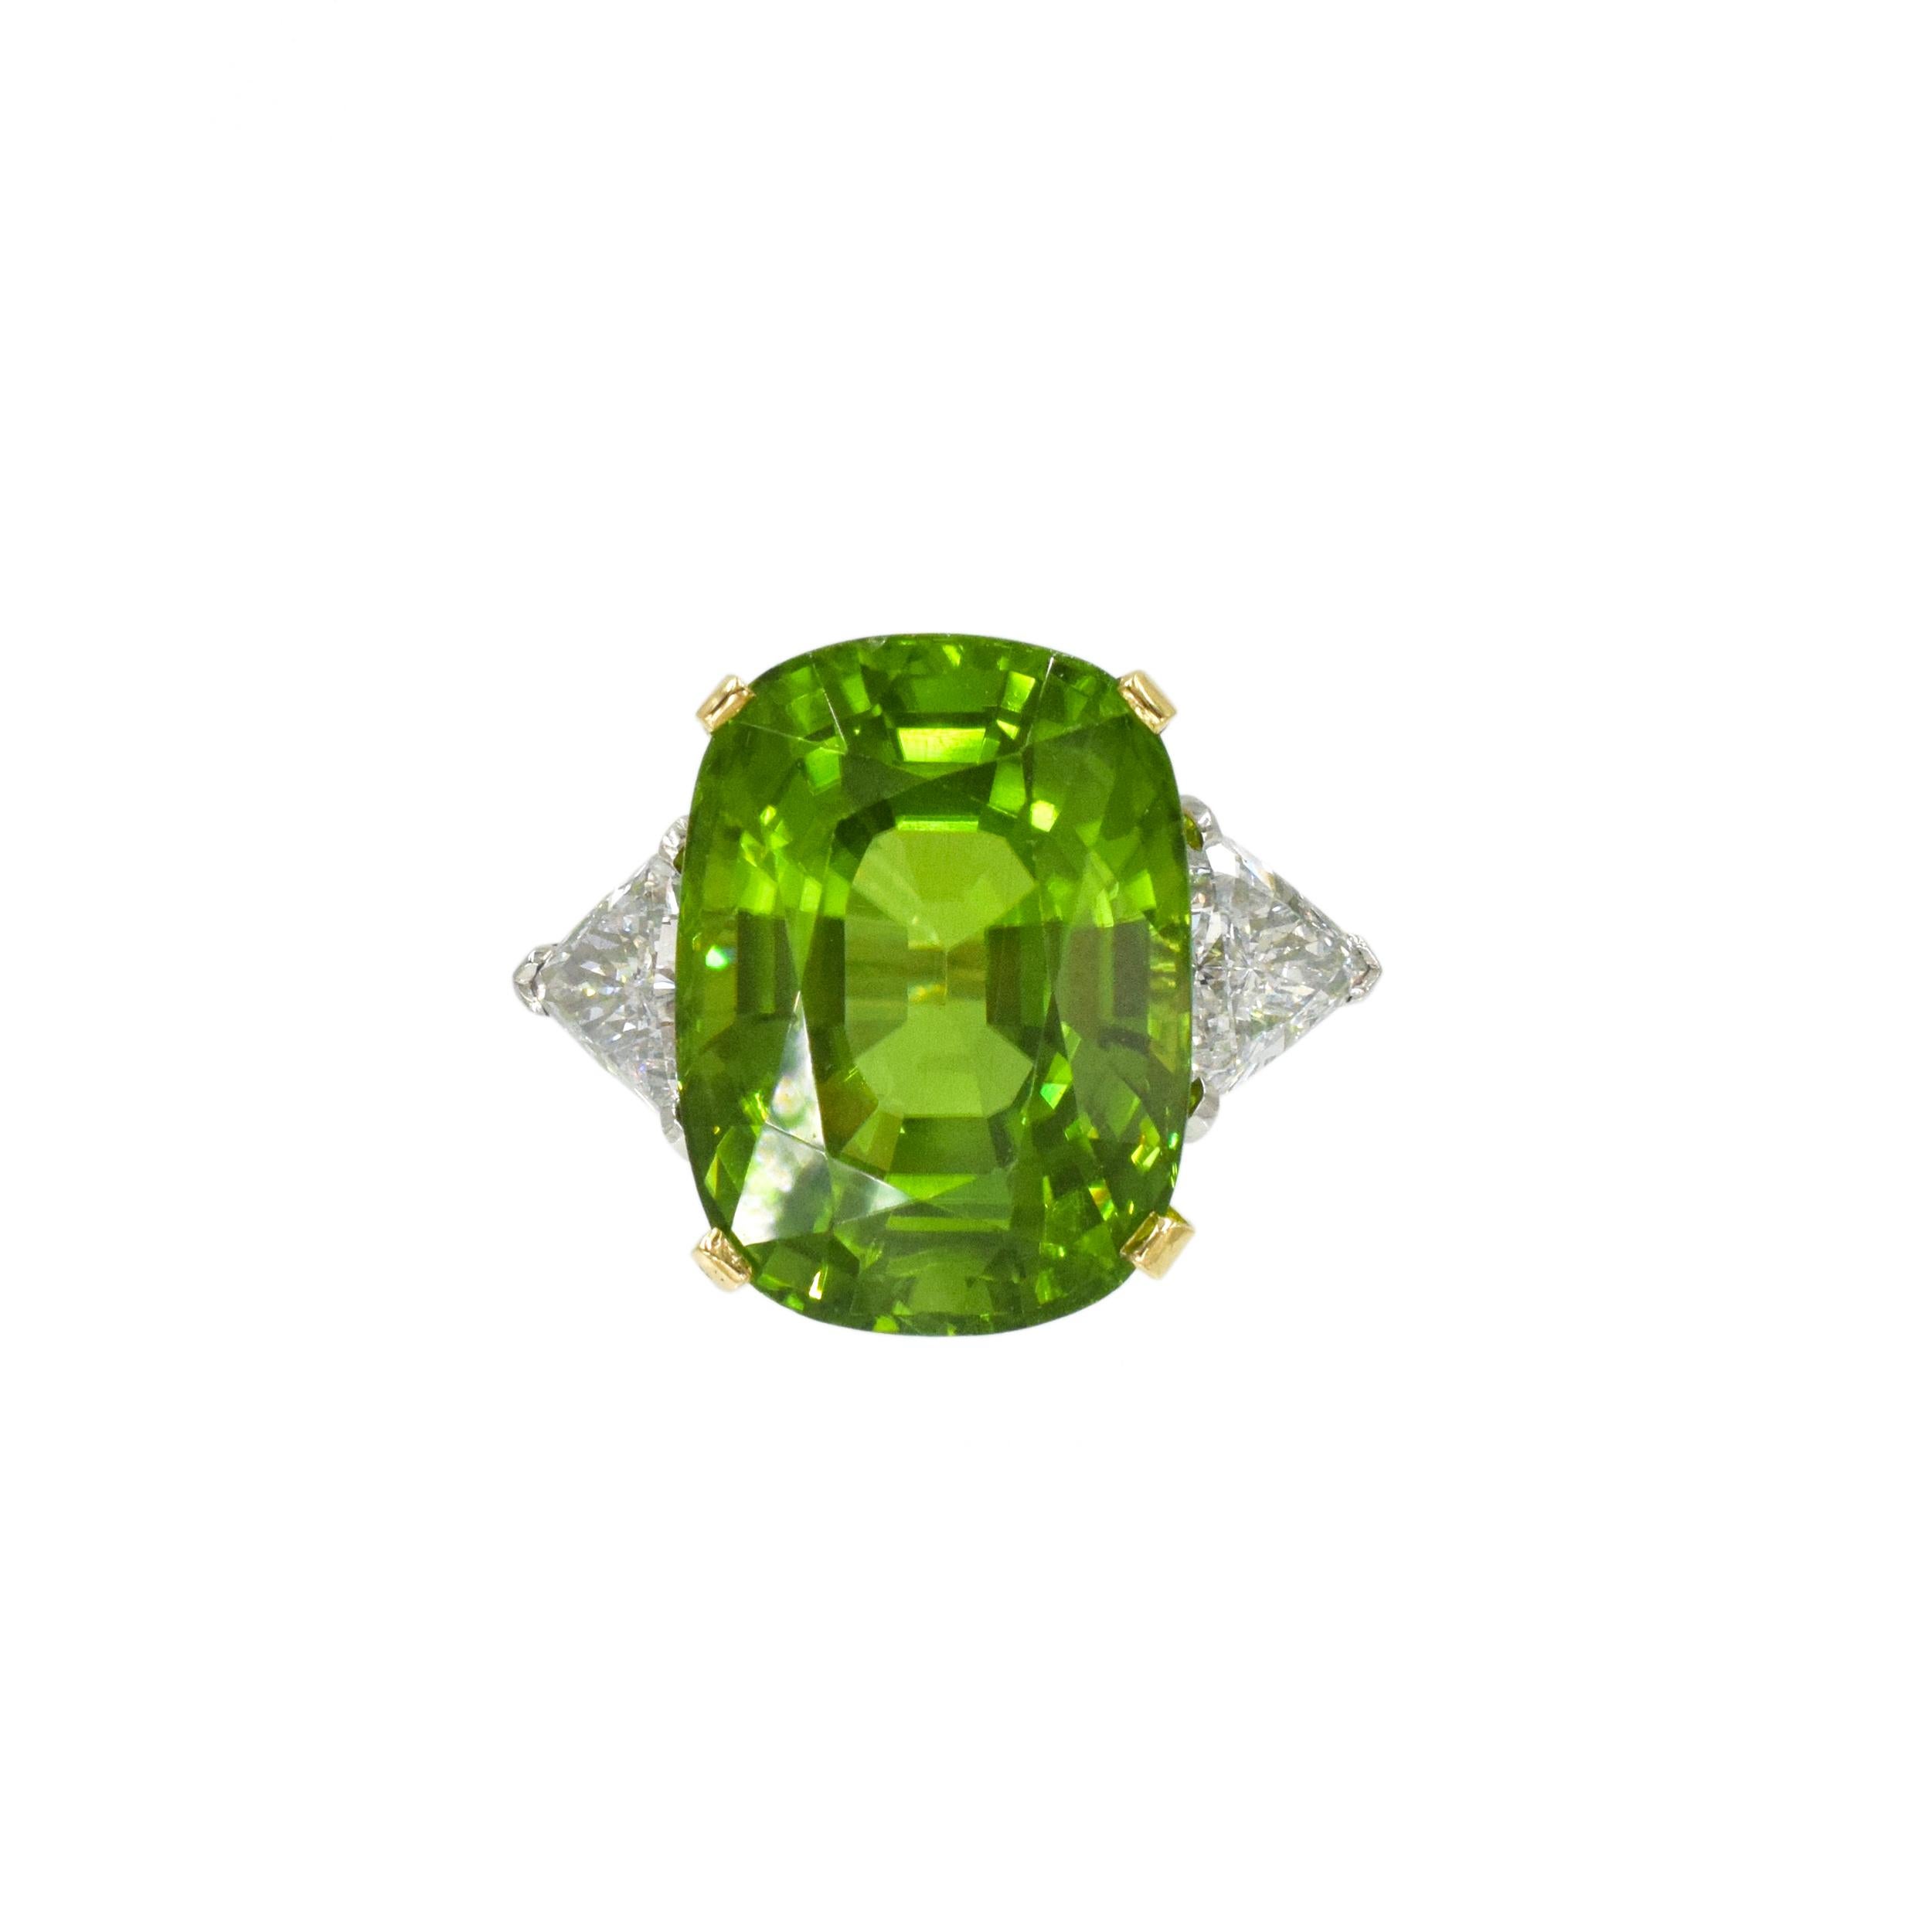 Carvin French Platinum and 18K Yellow Gold, Peridot and Diamond Ring, centered with 24.35 carats
cushion-shaped peridot, accented with 2 trillion-cut diamonds ap. 2.00 carats  Carvin French
obscured. Size 7 ½. Peridot: bright medium deep limey